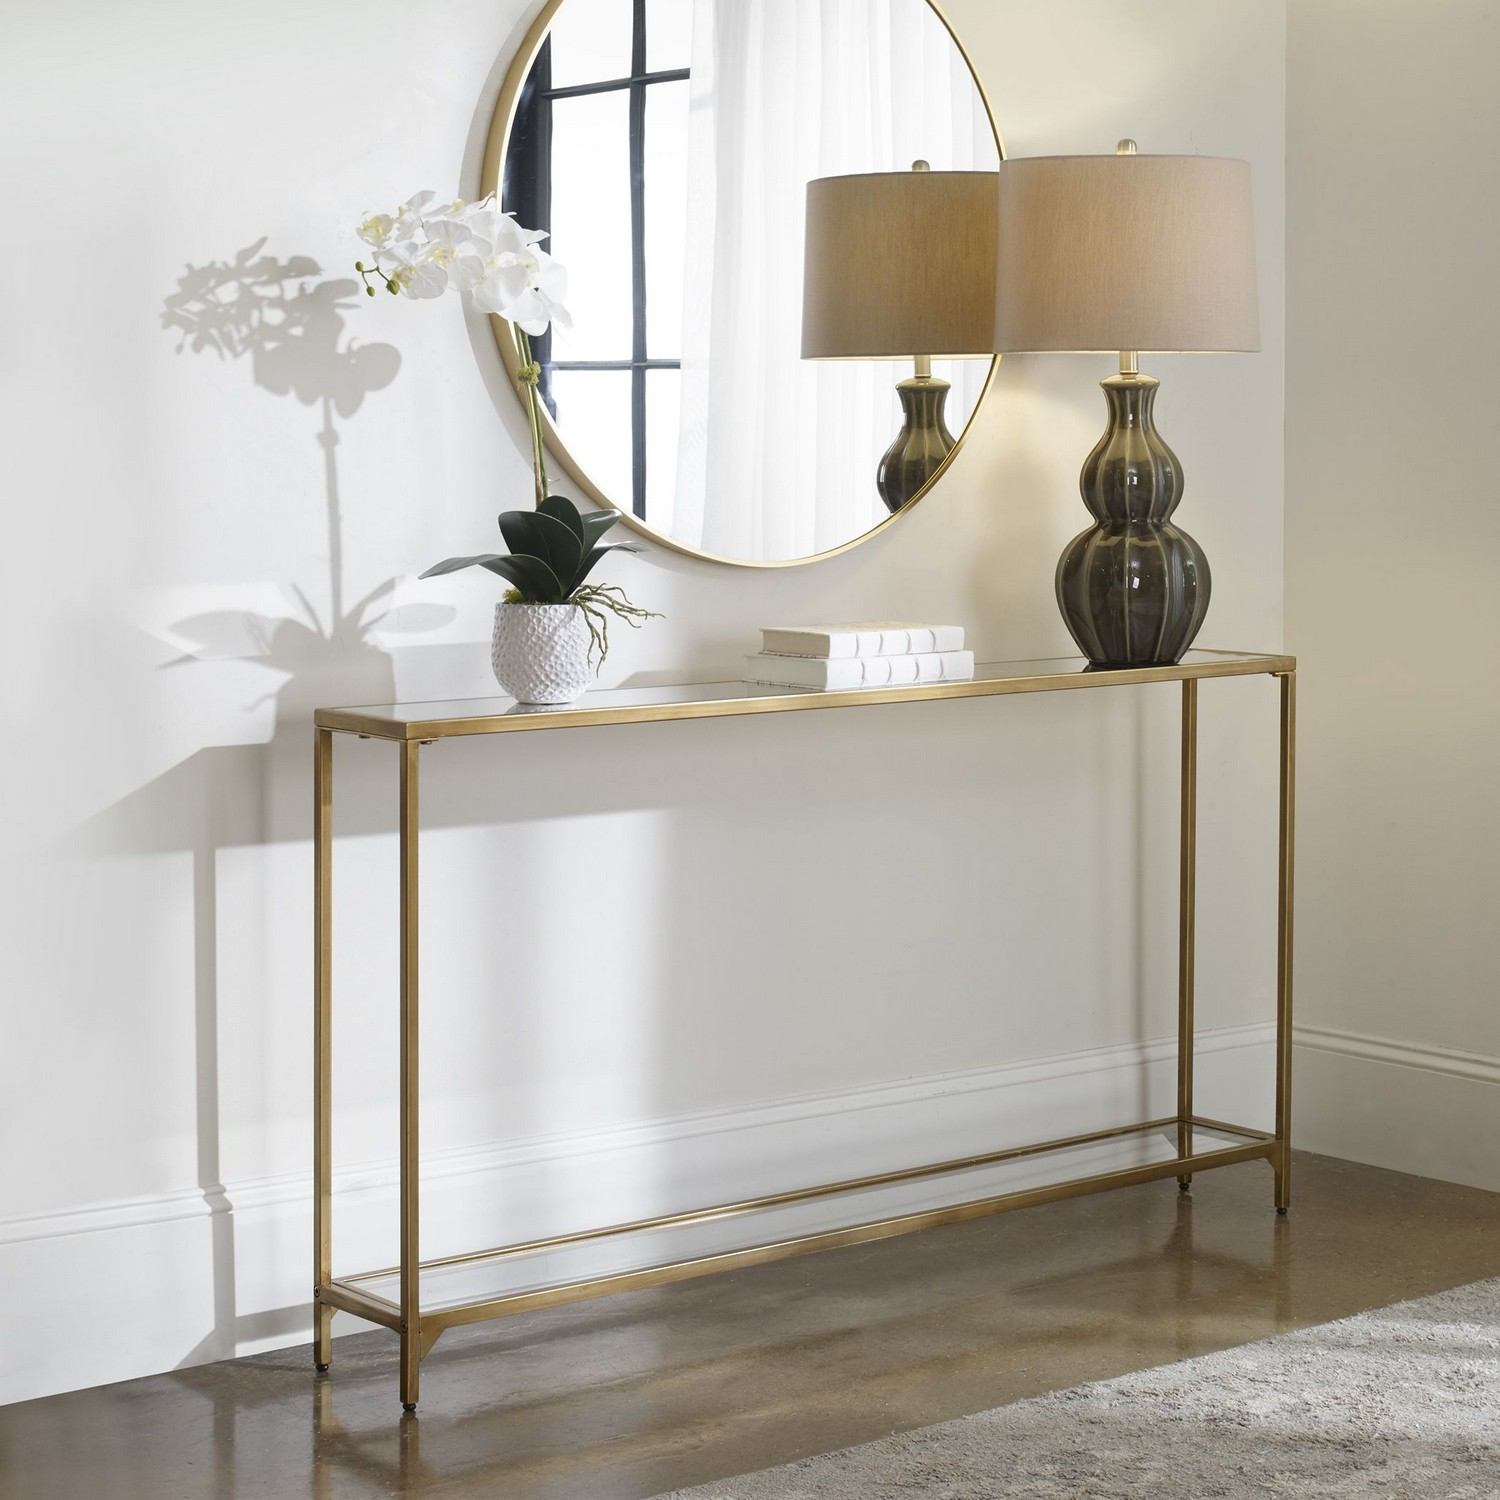 Uttermost W23005 Console Table - Warm Gold